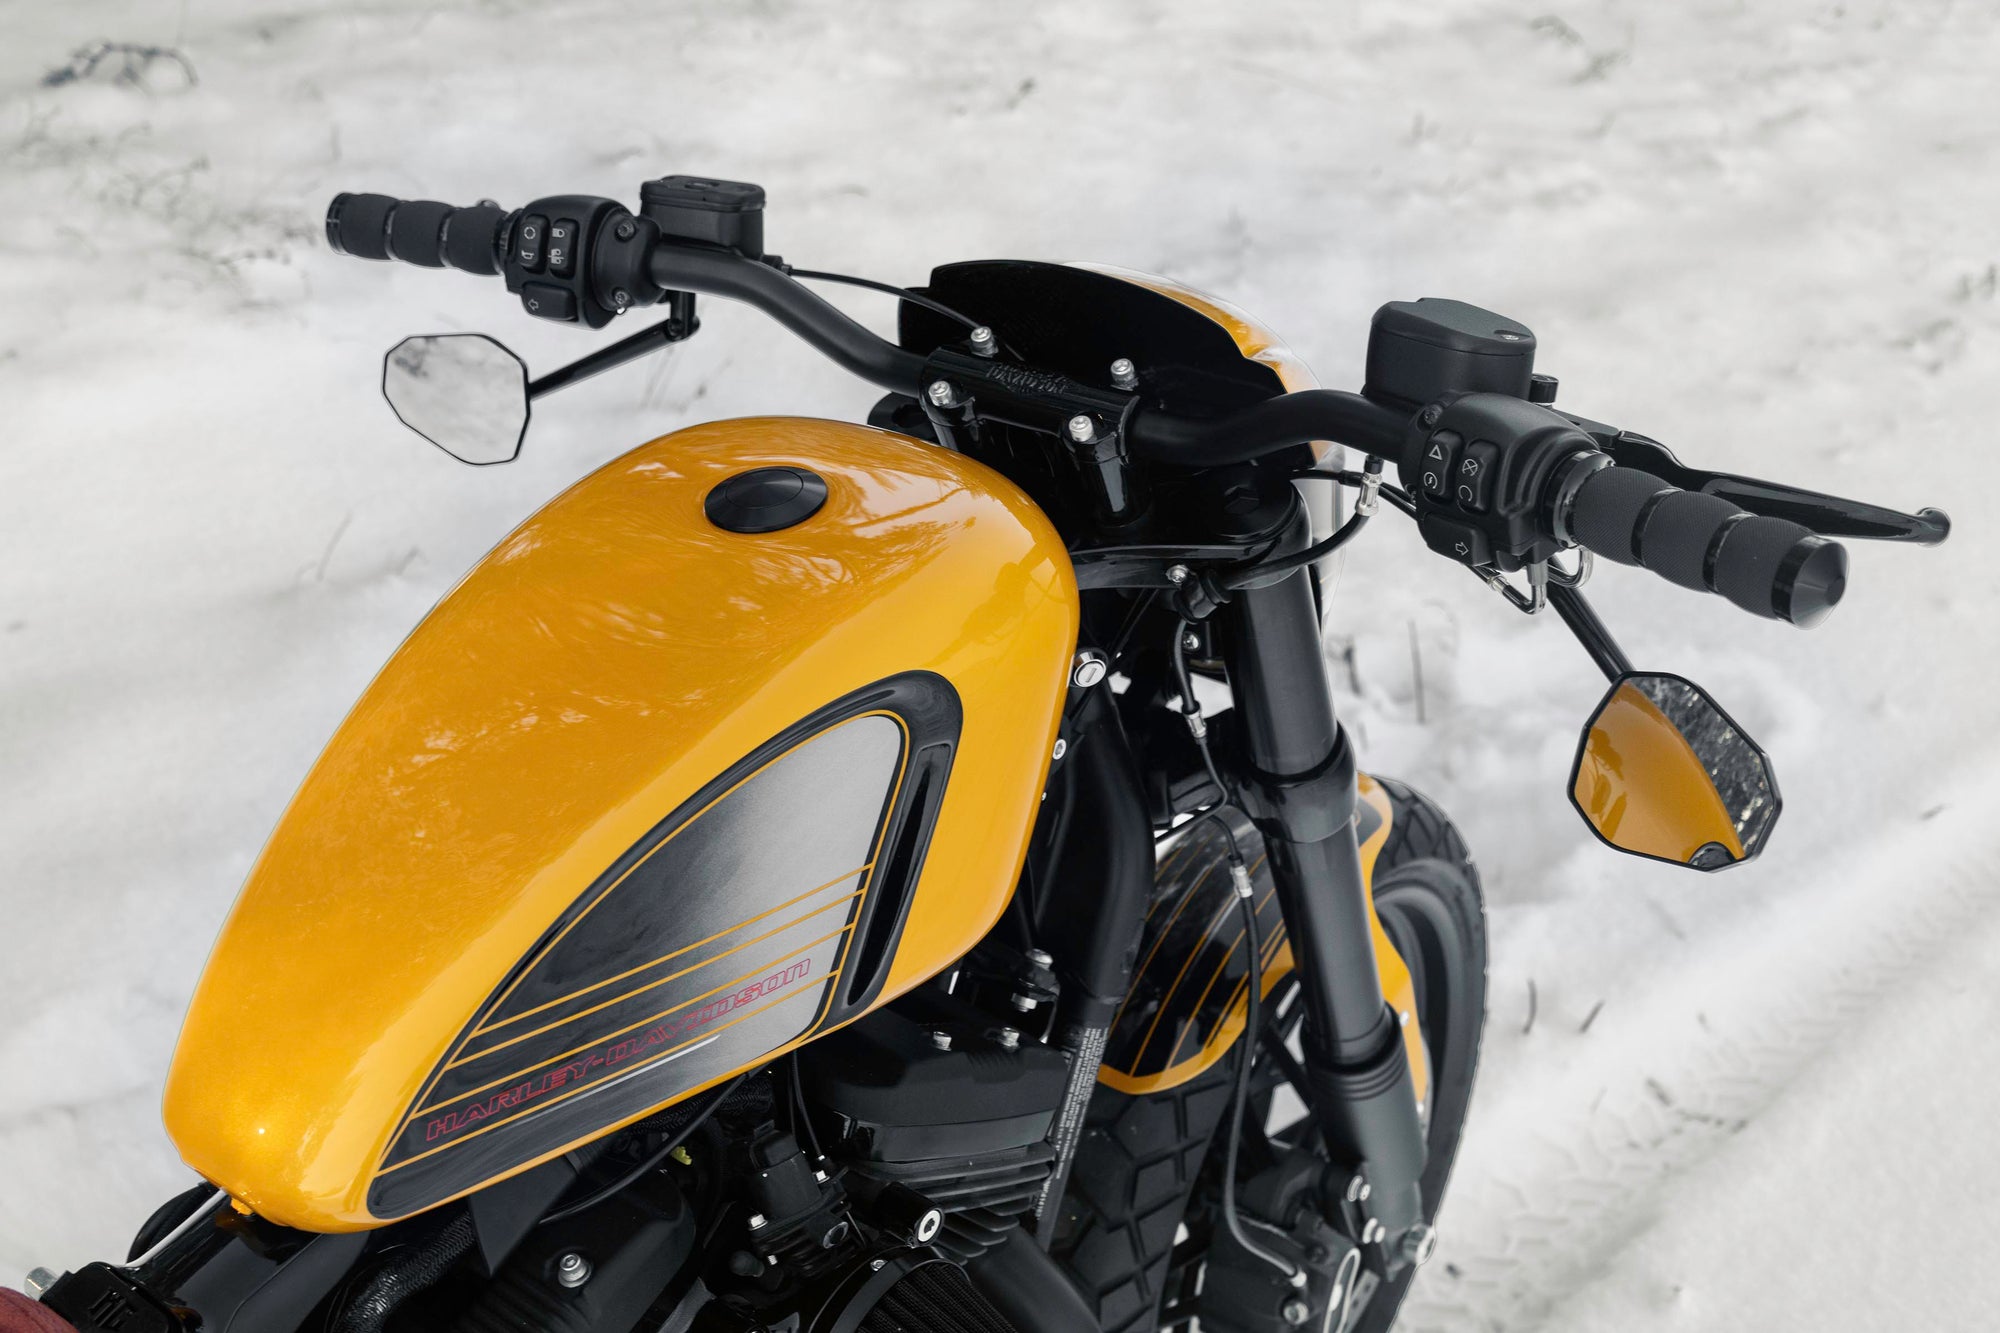 Zoomed Harley Davidson Roadster motorcycle with Killer Custom parts from the rear with some snow in the background